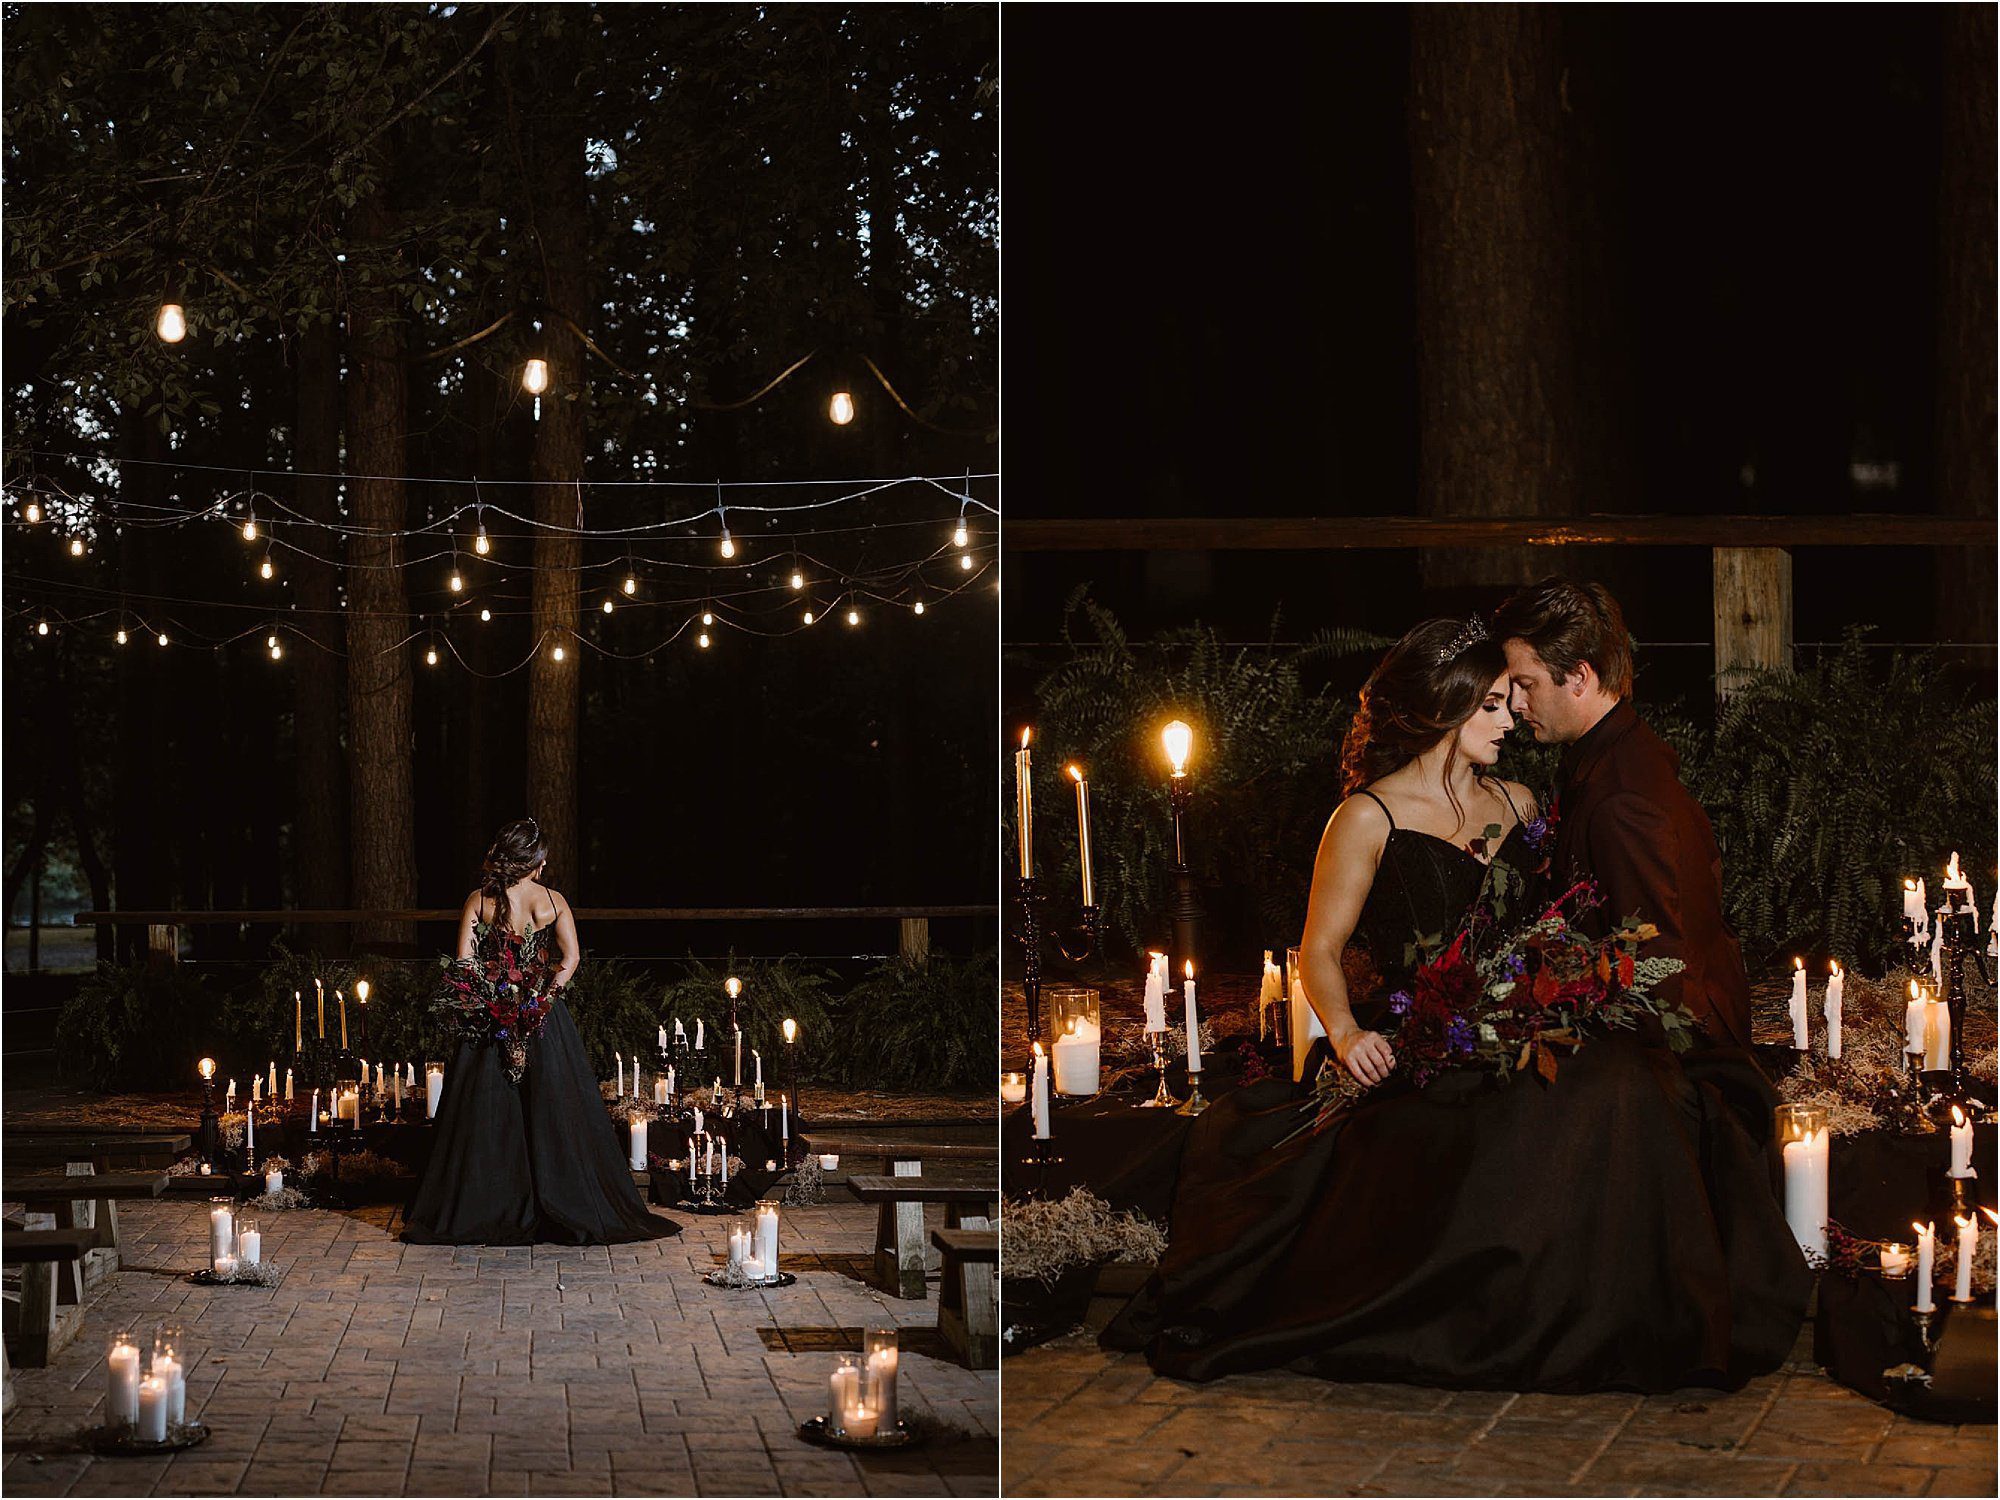 Halloween wedding ceremony with candles